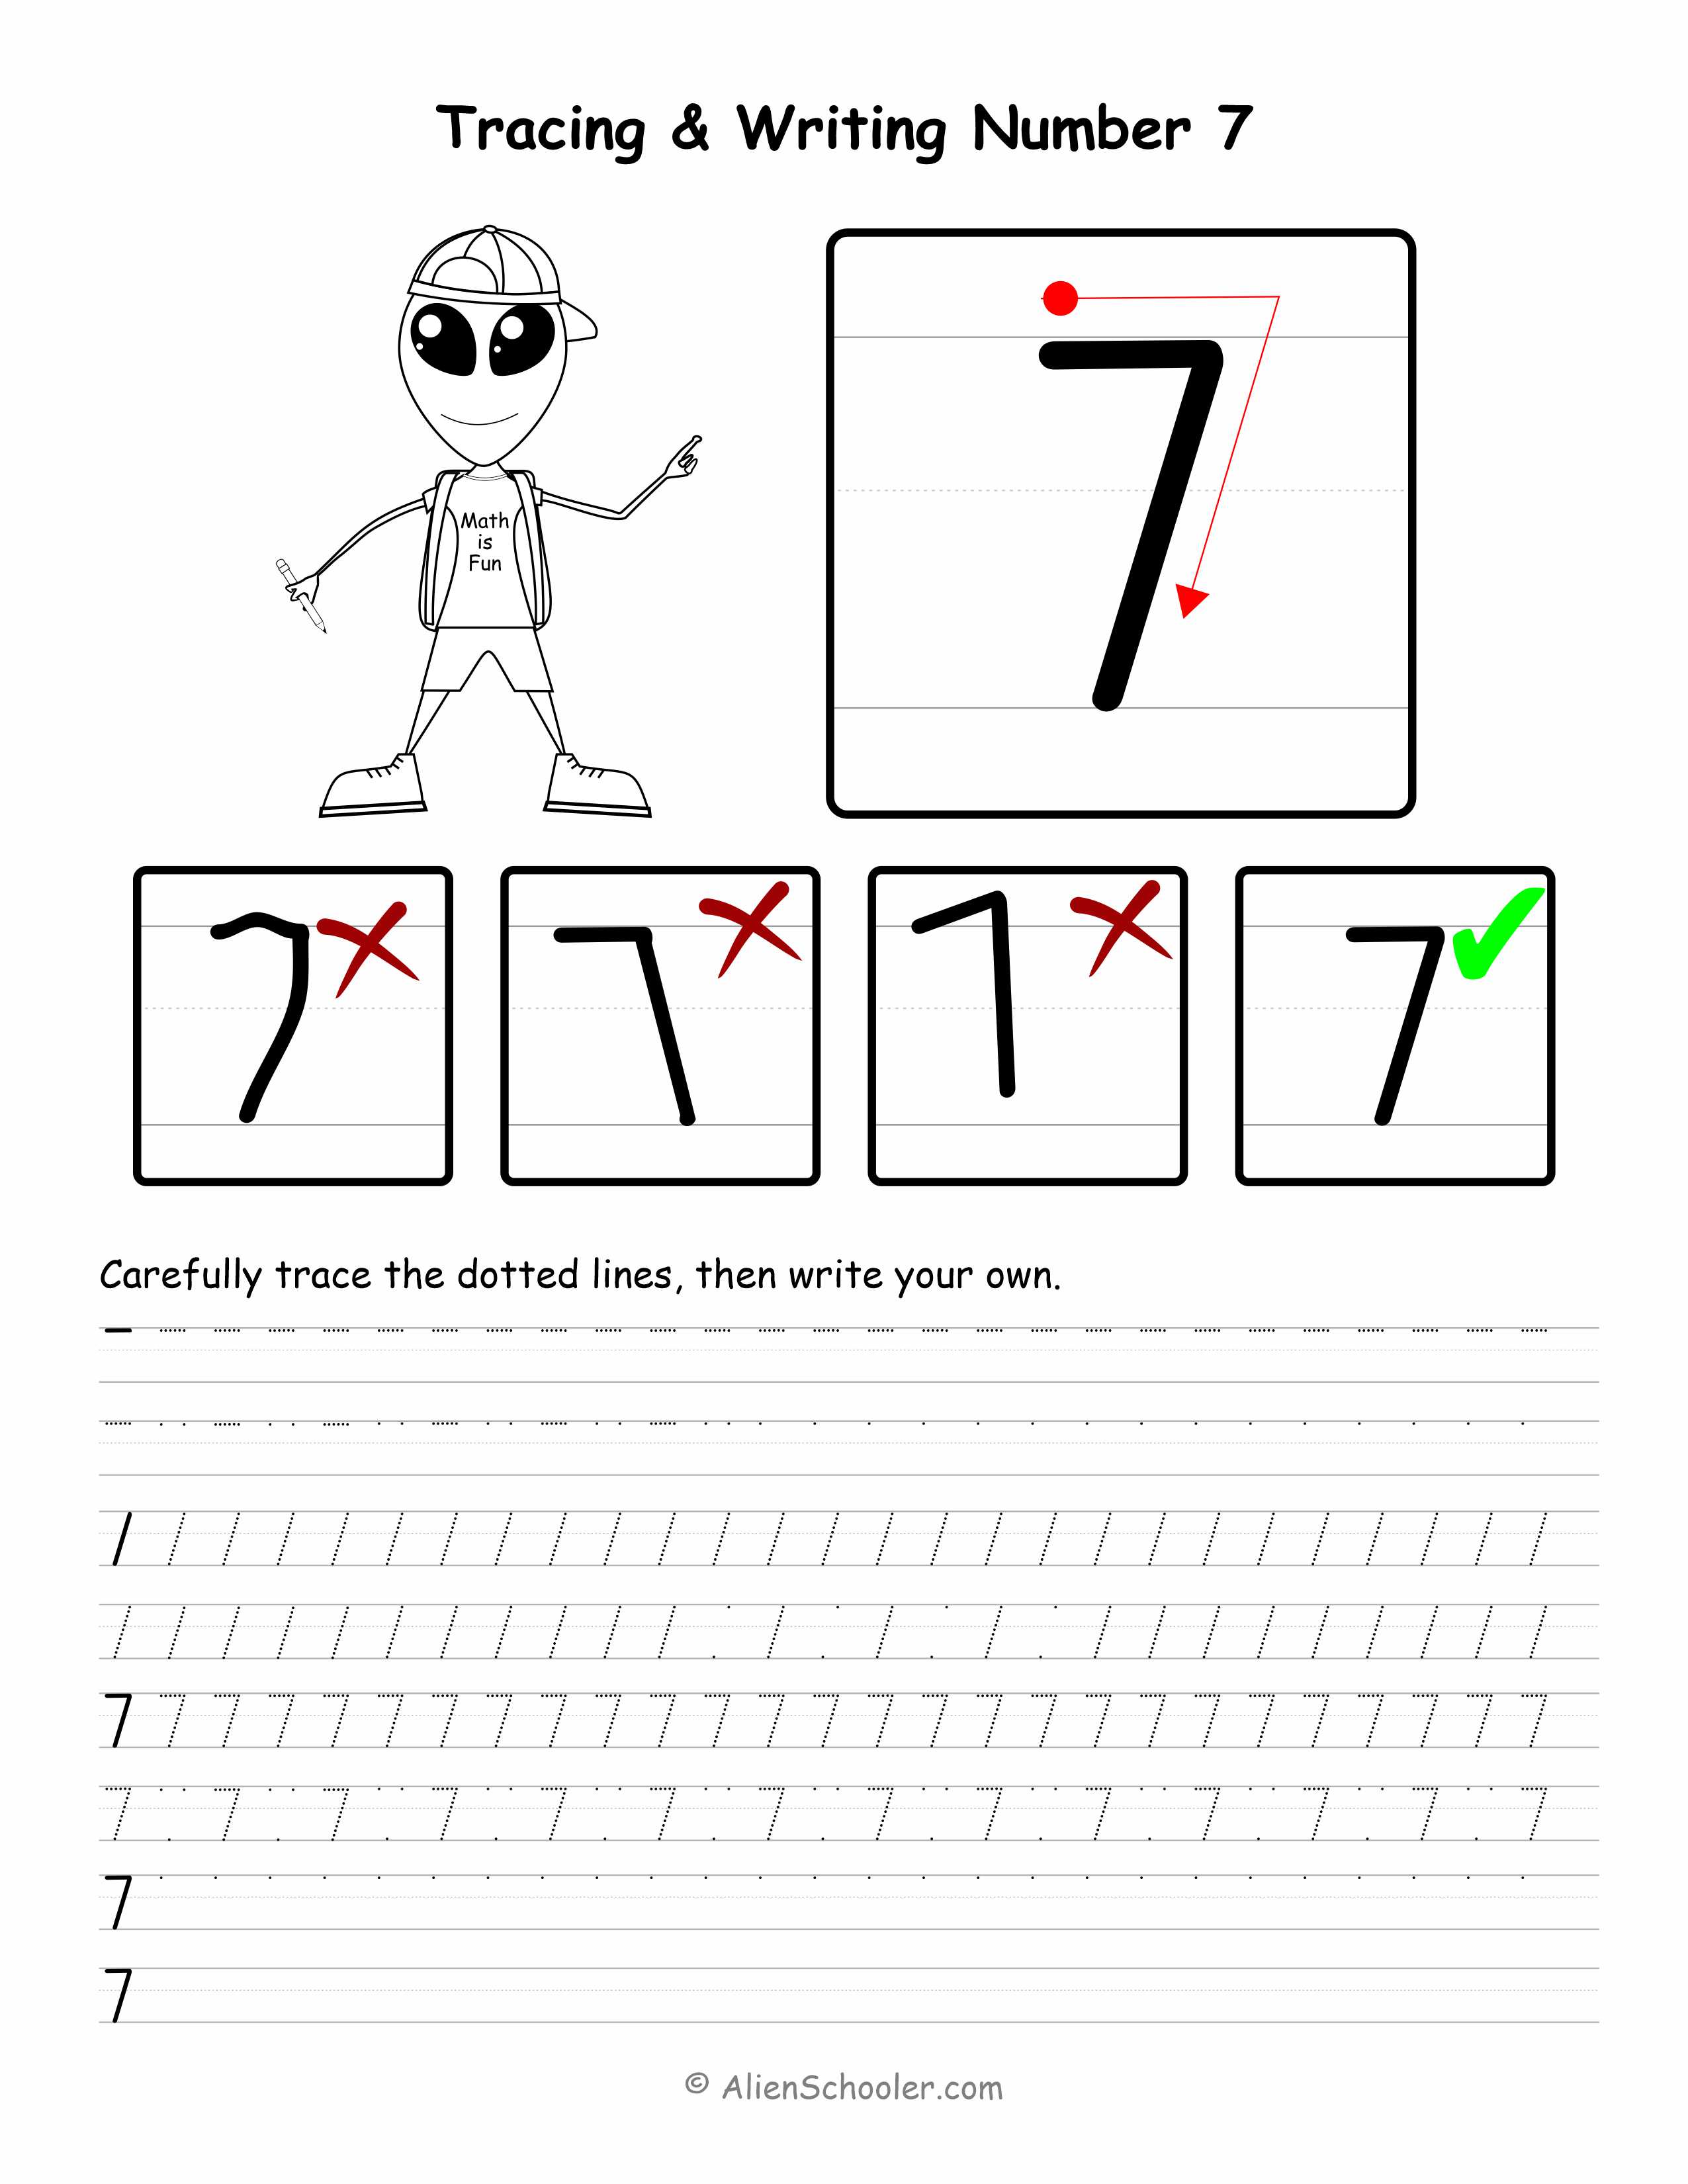 counting-the-number-7-worksheets-99worksheets